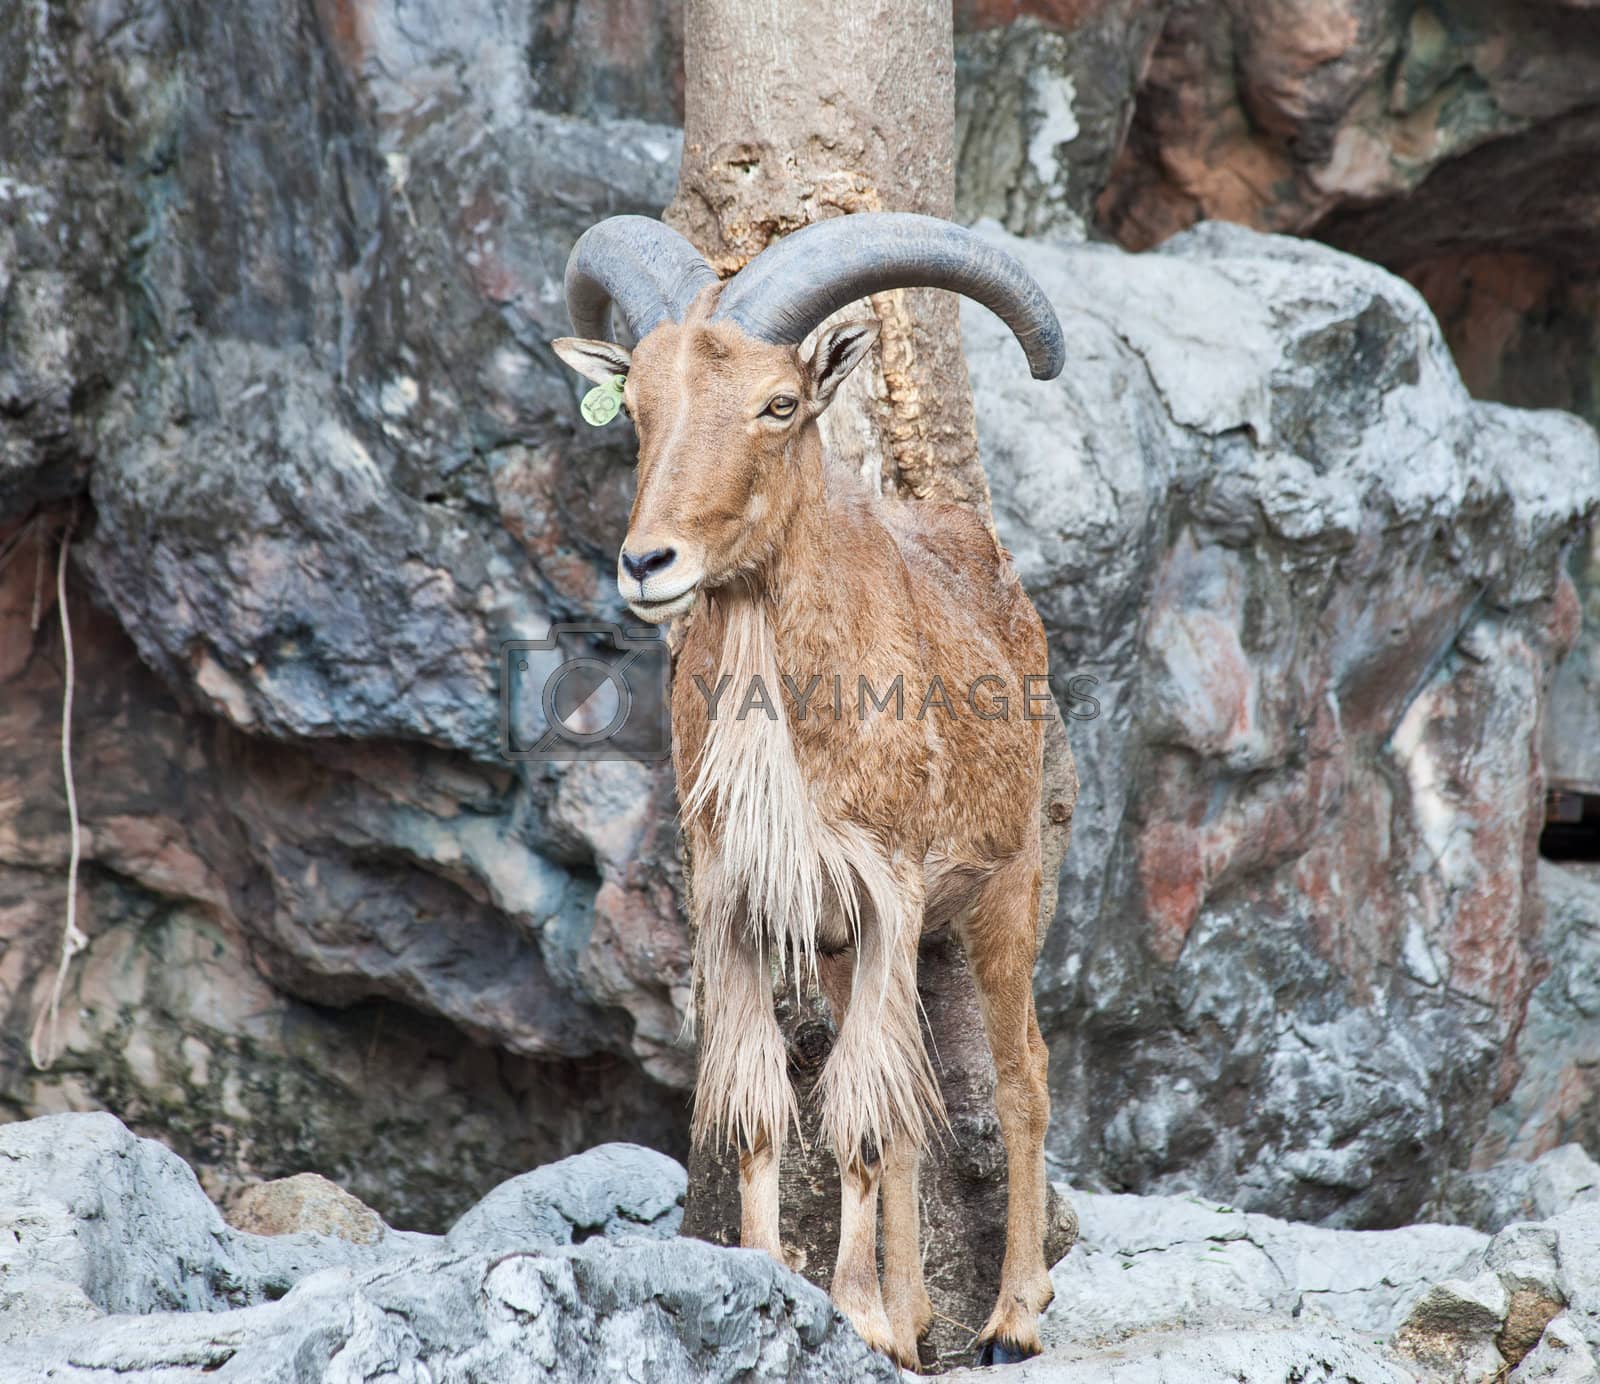 Royalty free image of barbary sheep by pinkblue